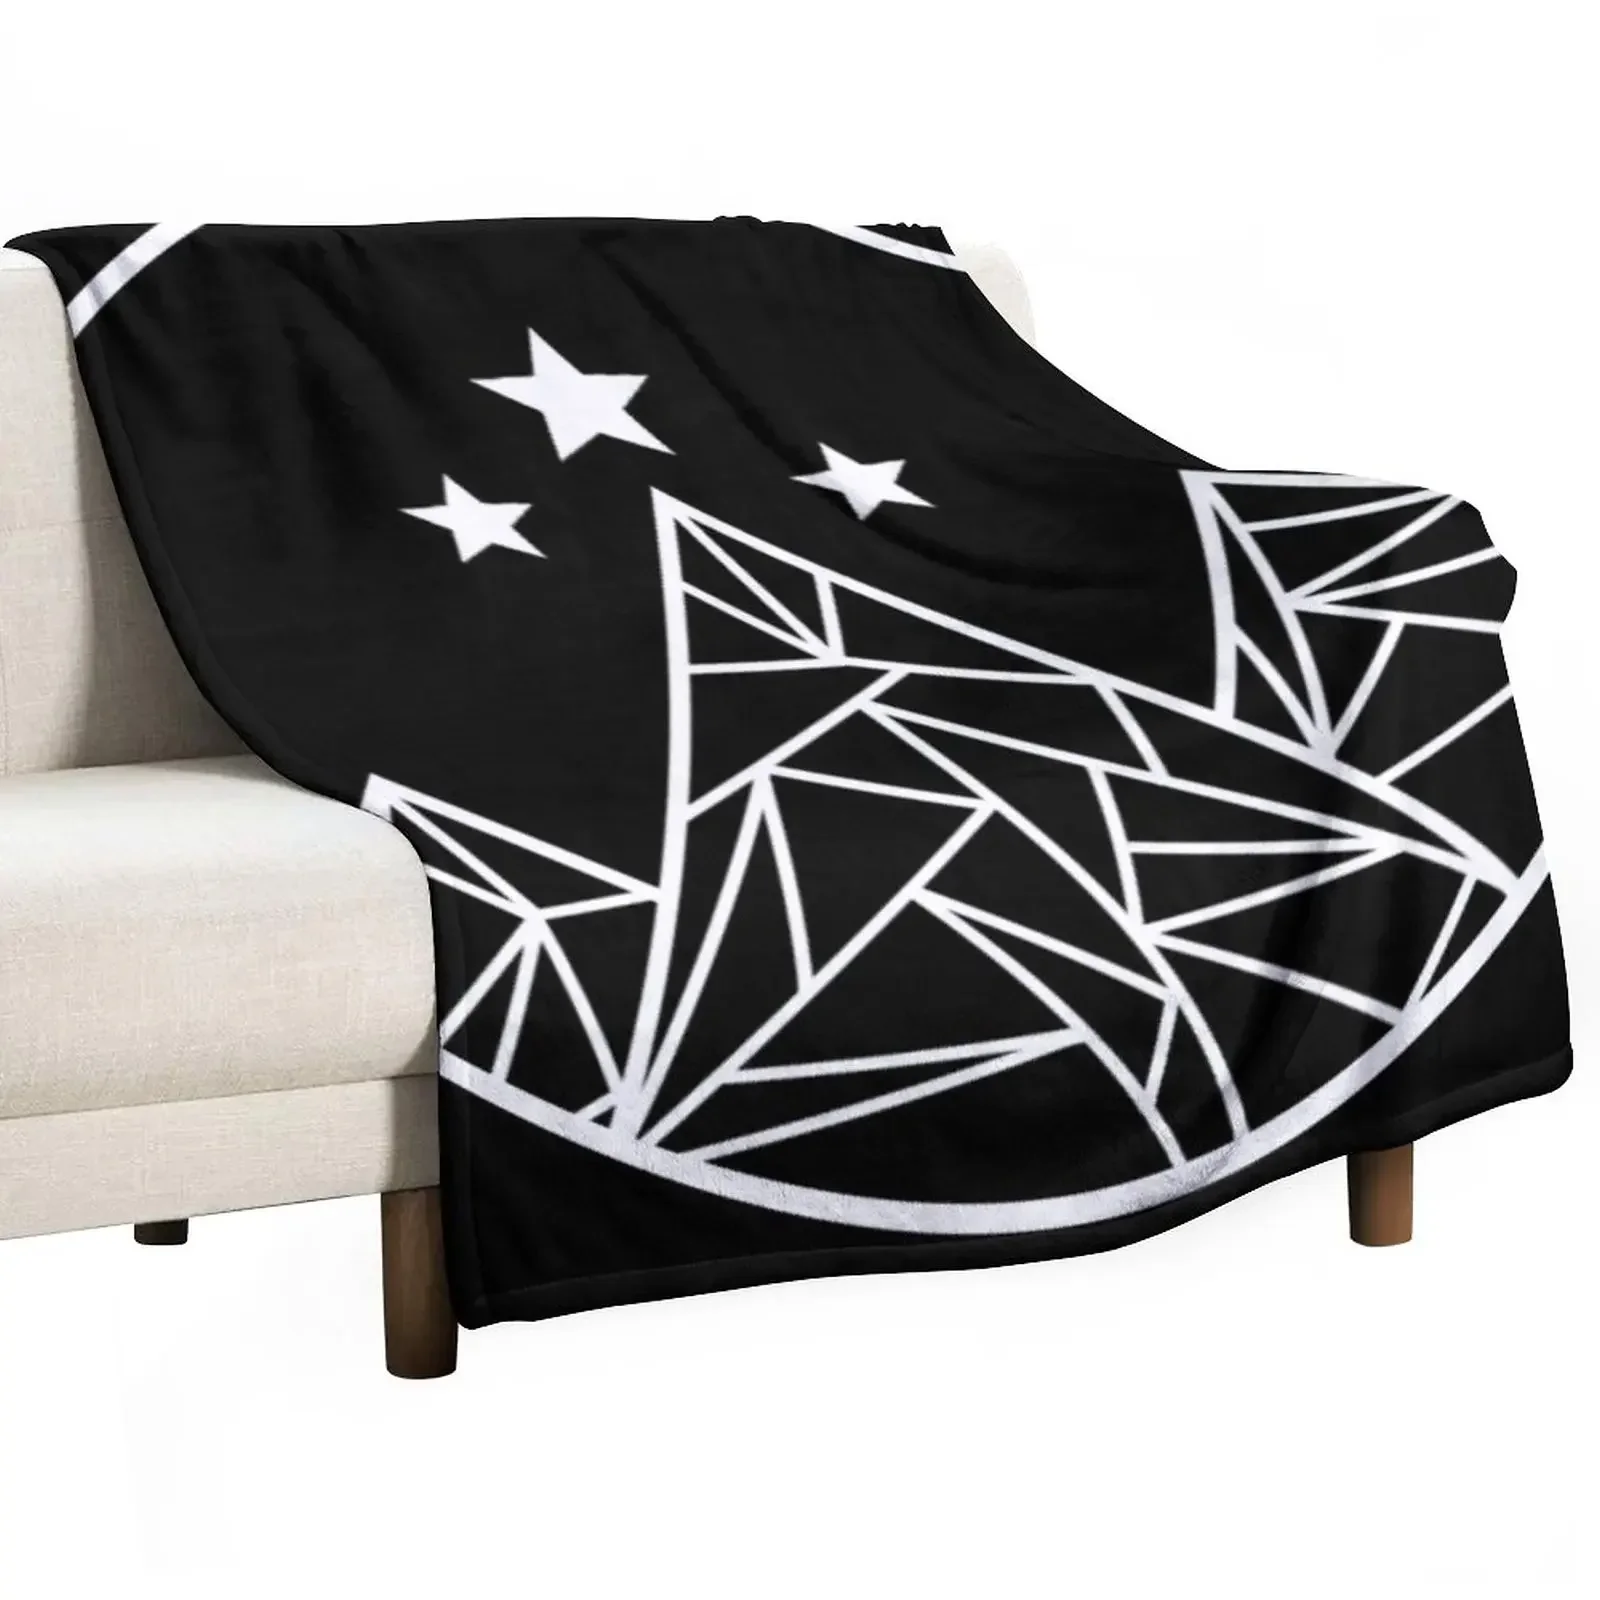 

Mountains and Stars - White Outline Throw Blanket Shaggy Kid'S Hairys Cute Blankets